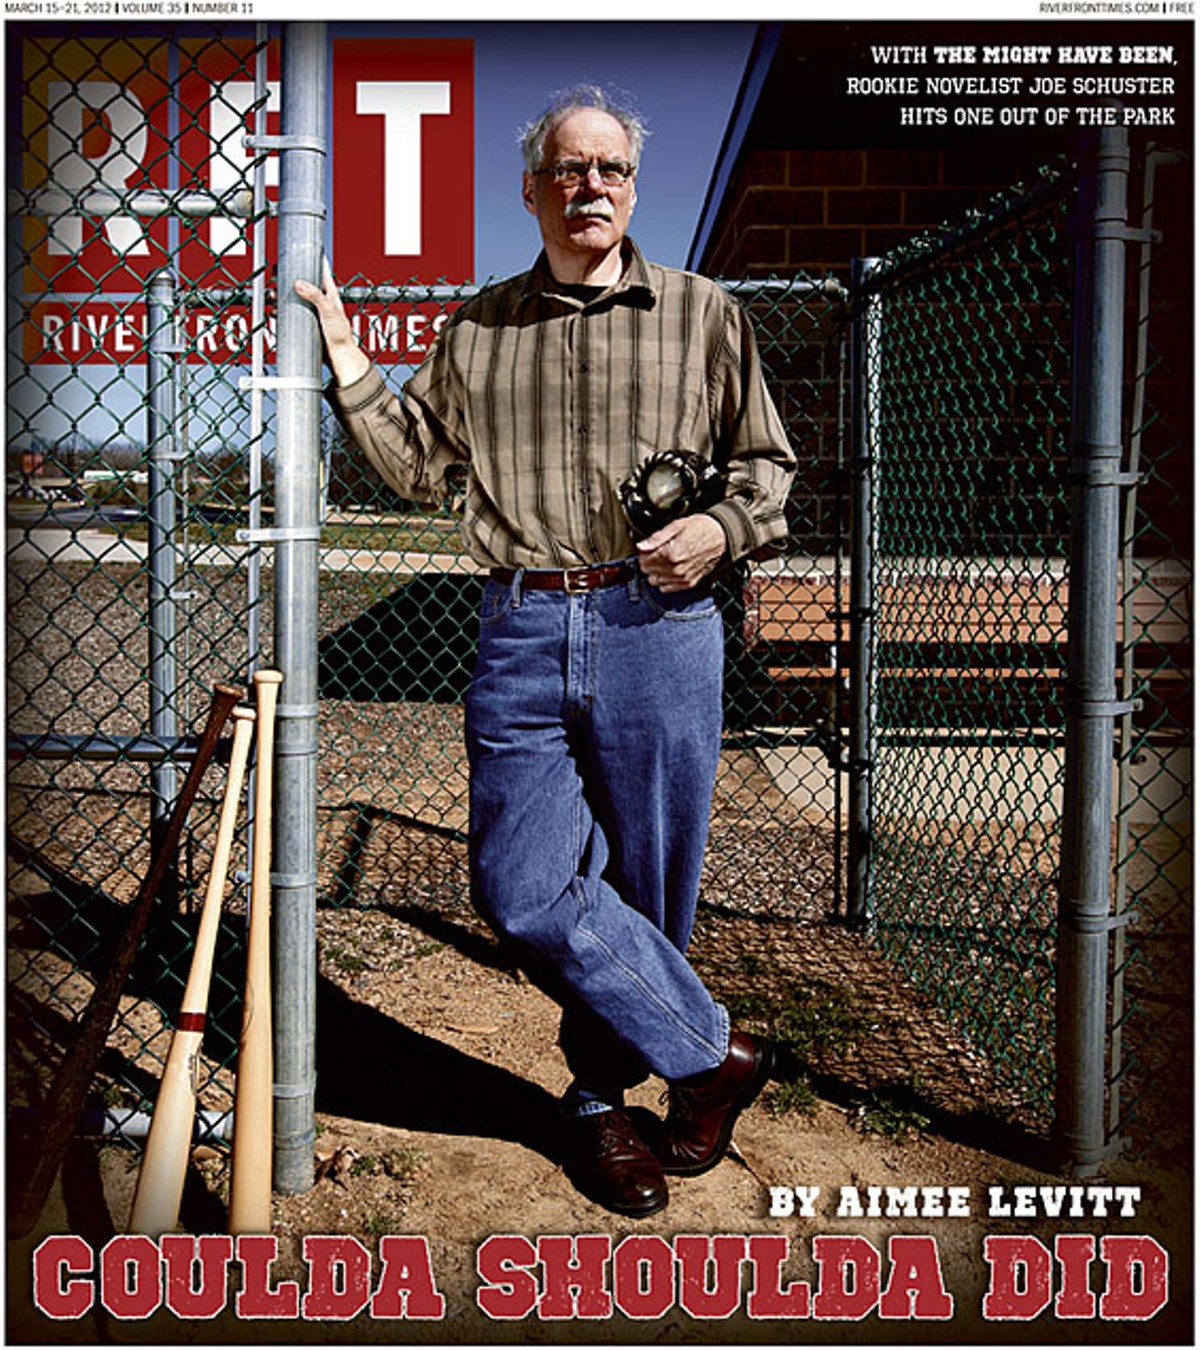 The Cover of March 15 Print Edition